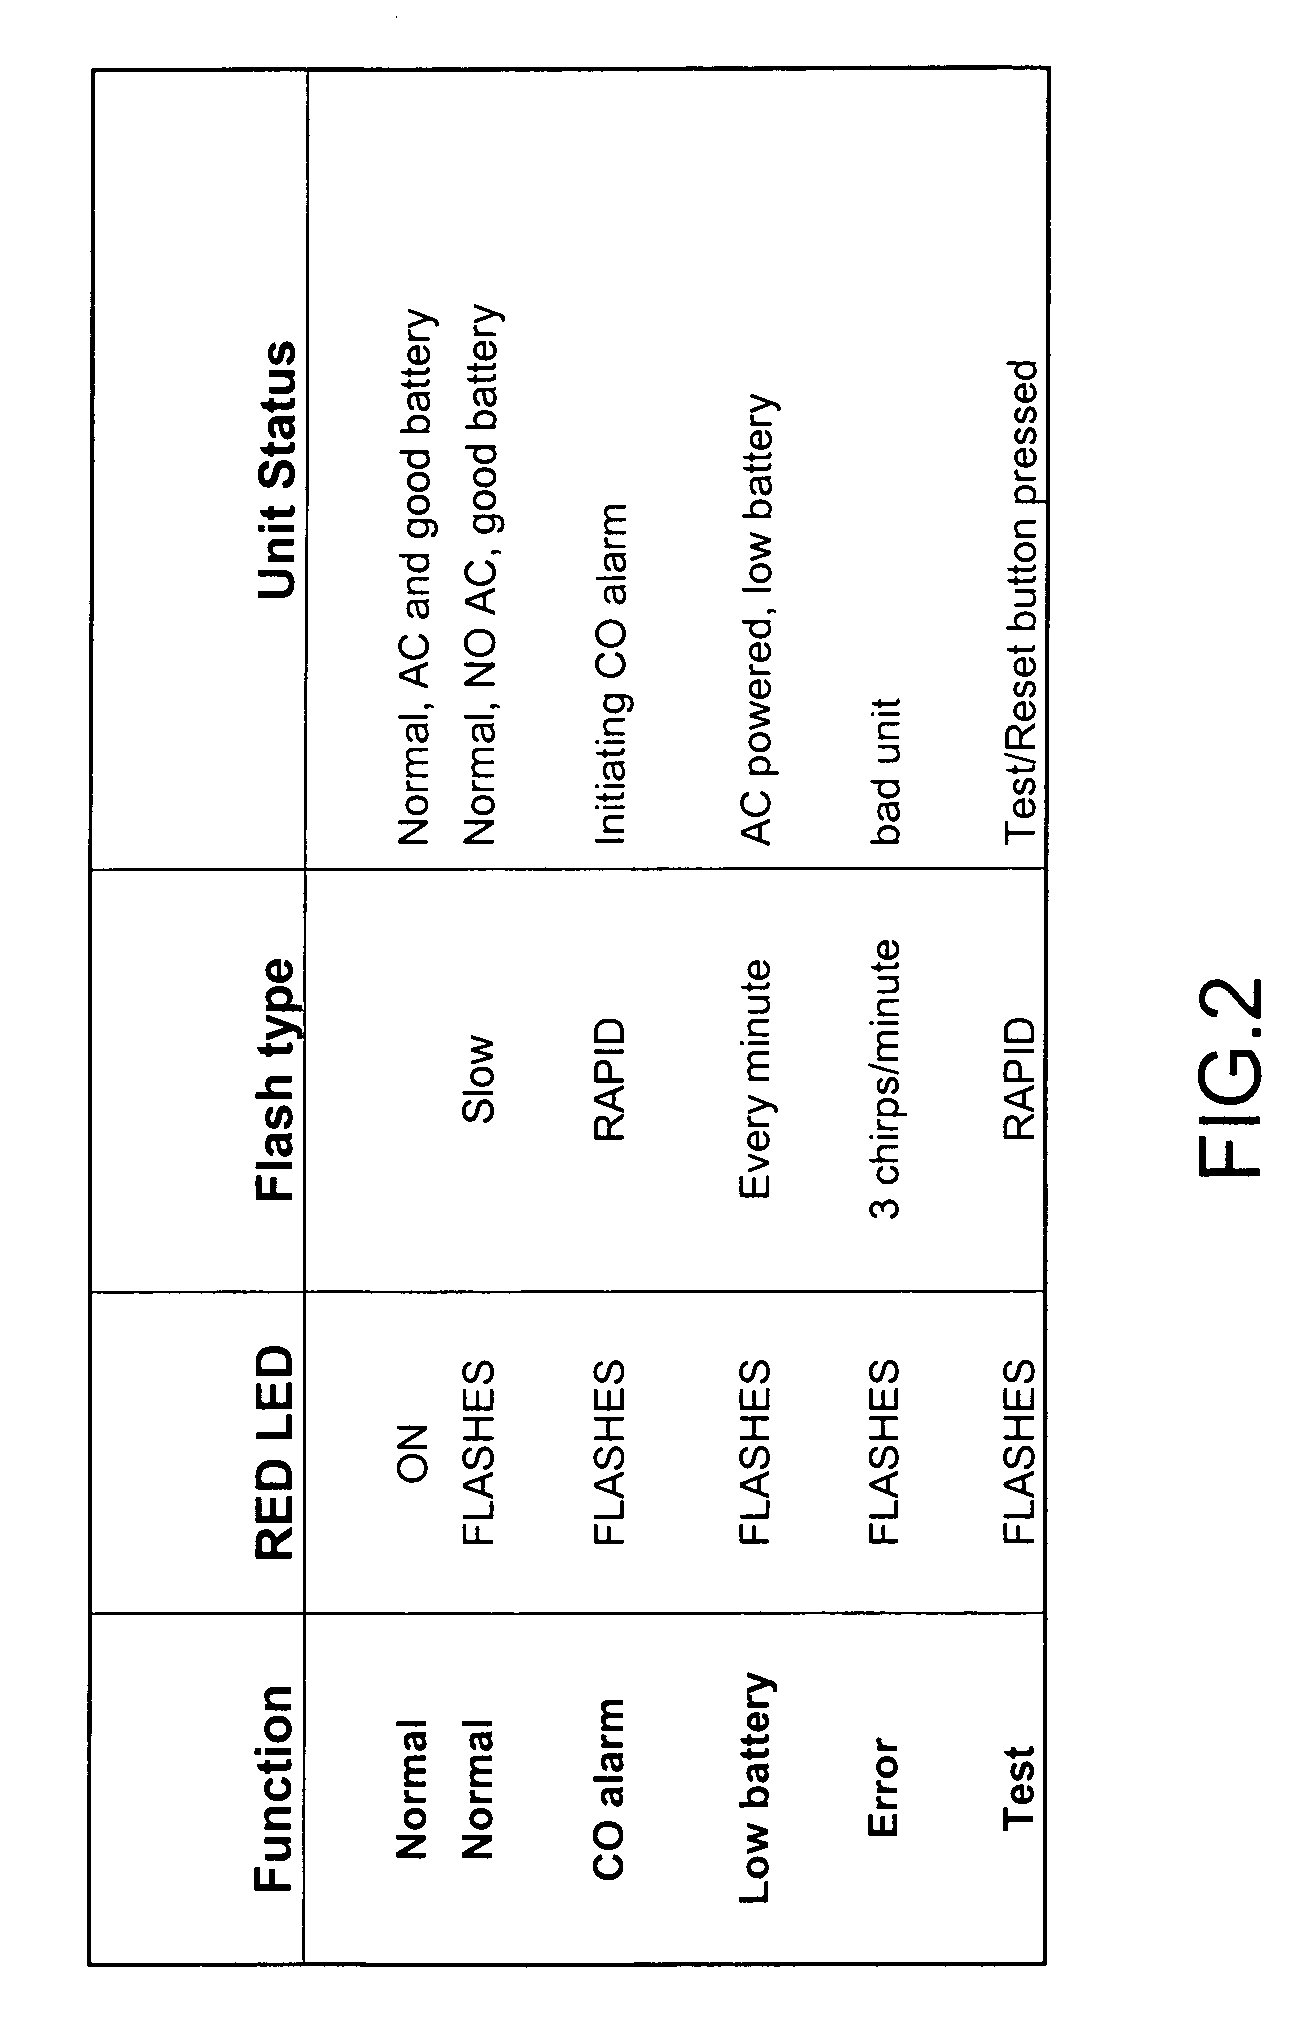 System and method for controlling toxic gas